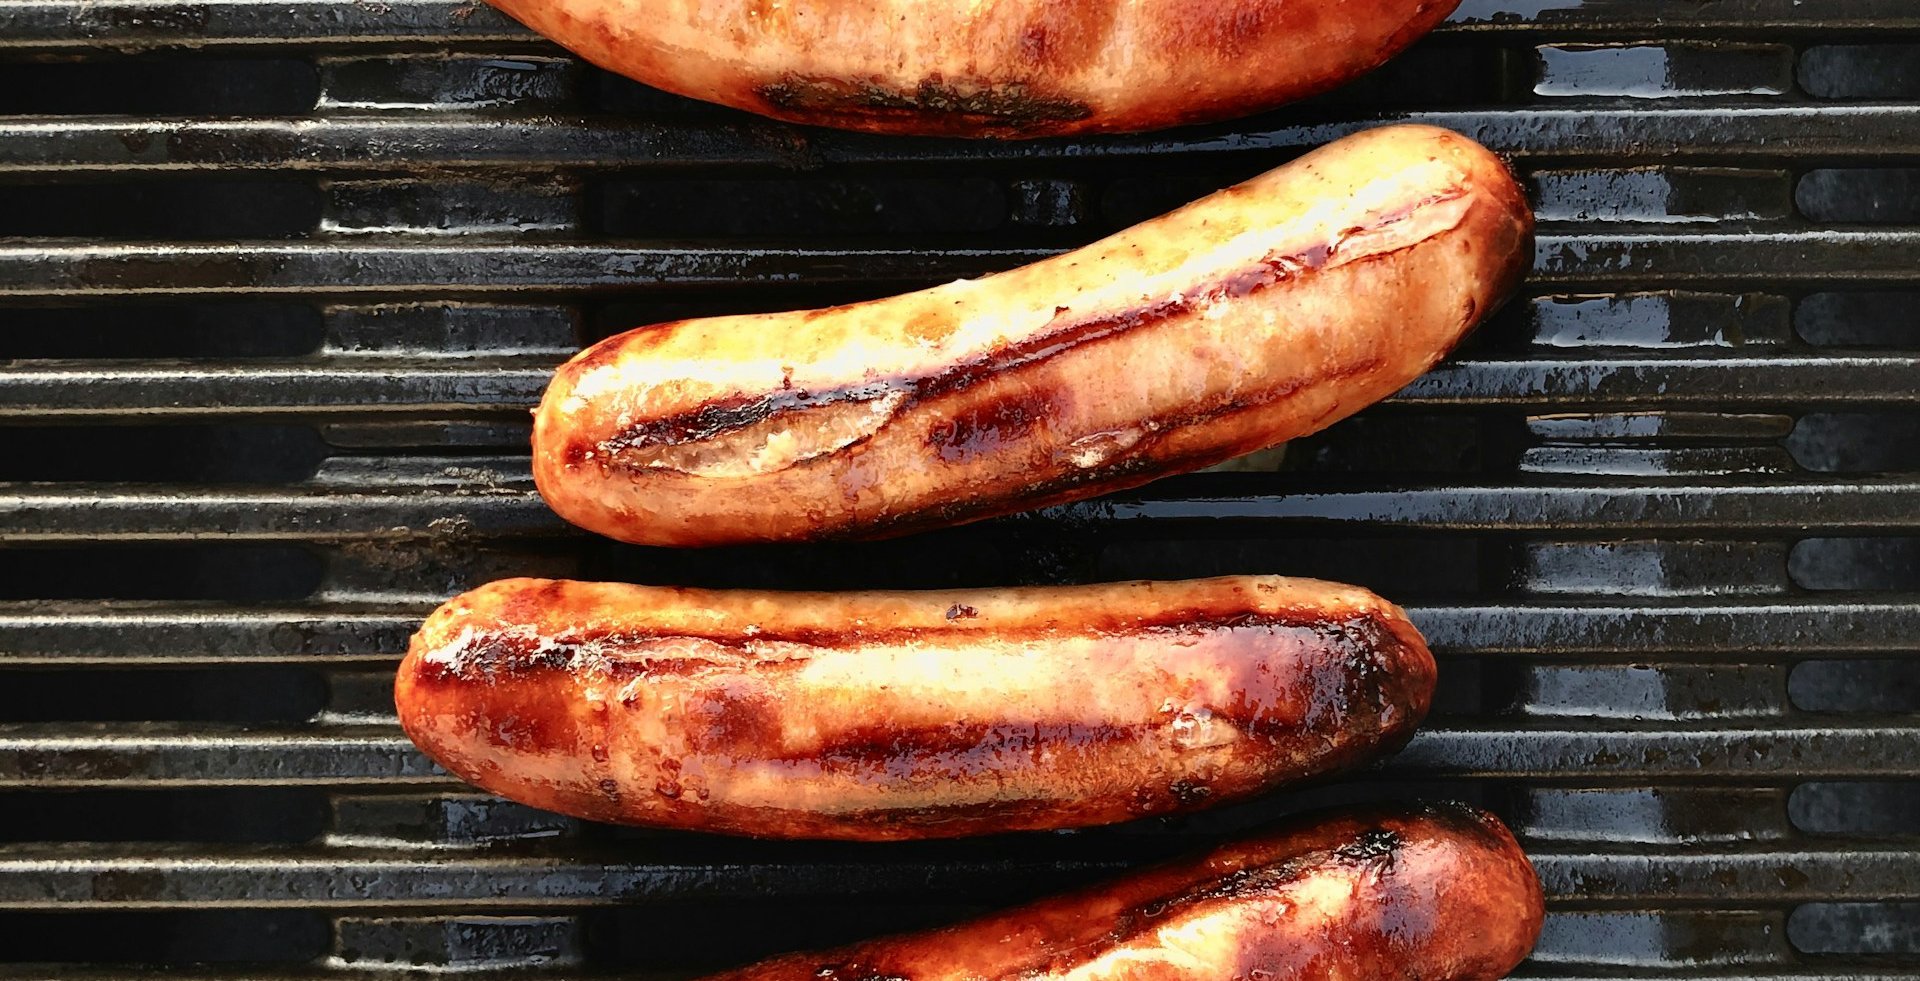 sausages on a BBQ